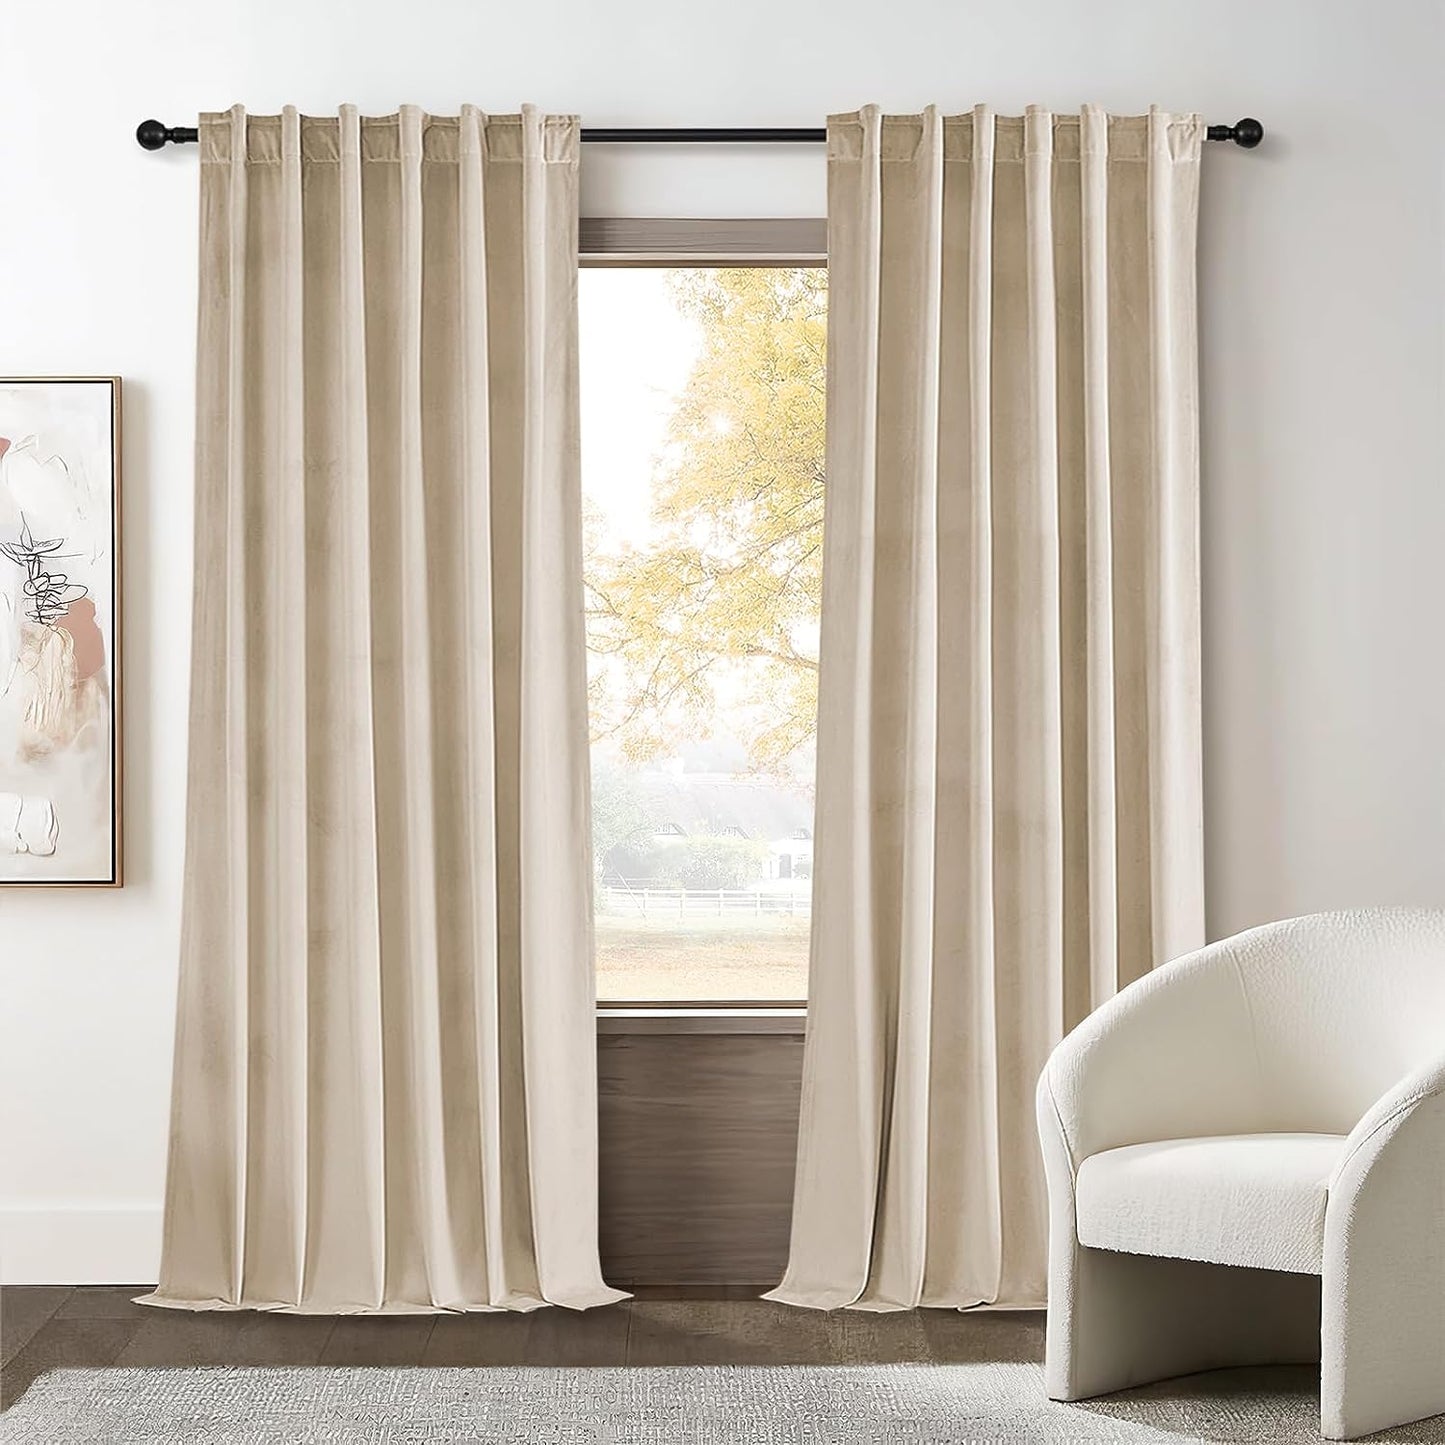 Topfinel Olive Green Velvet Curtains 84 Inches Long for Living Room,Blackout Thermal Insulated Curtains for Bedroom,Back Tab Modern Window Treatment for Living Room,52X84 Inch Length,Olive Green  Top Fine Beige 52" X 84" 